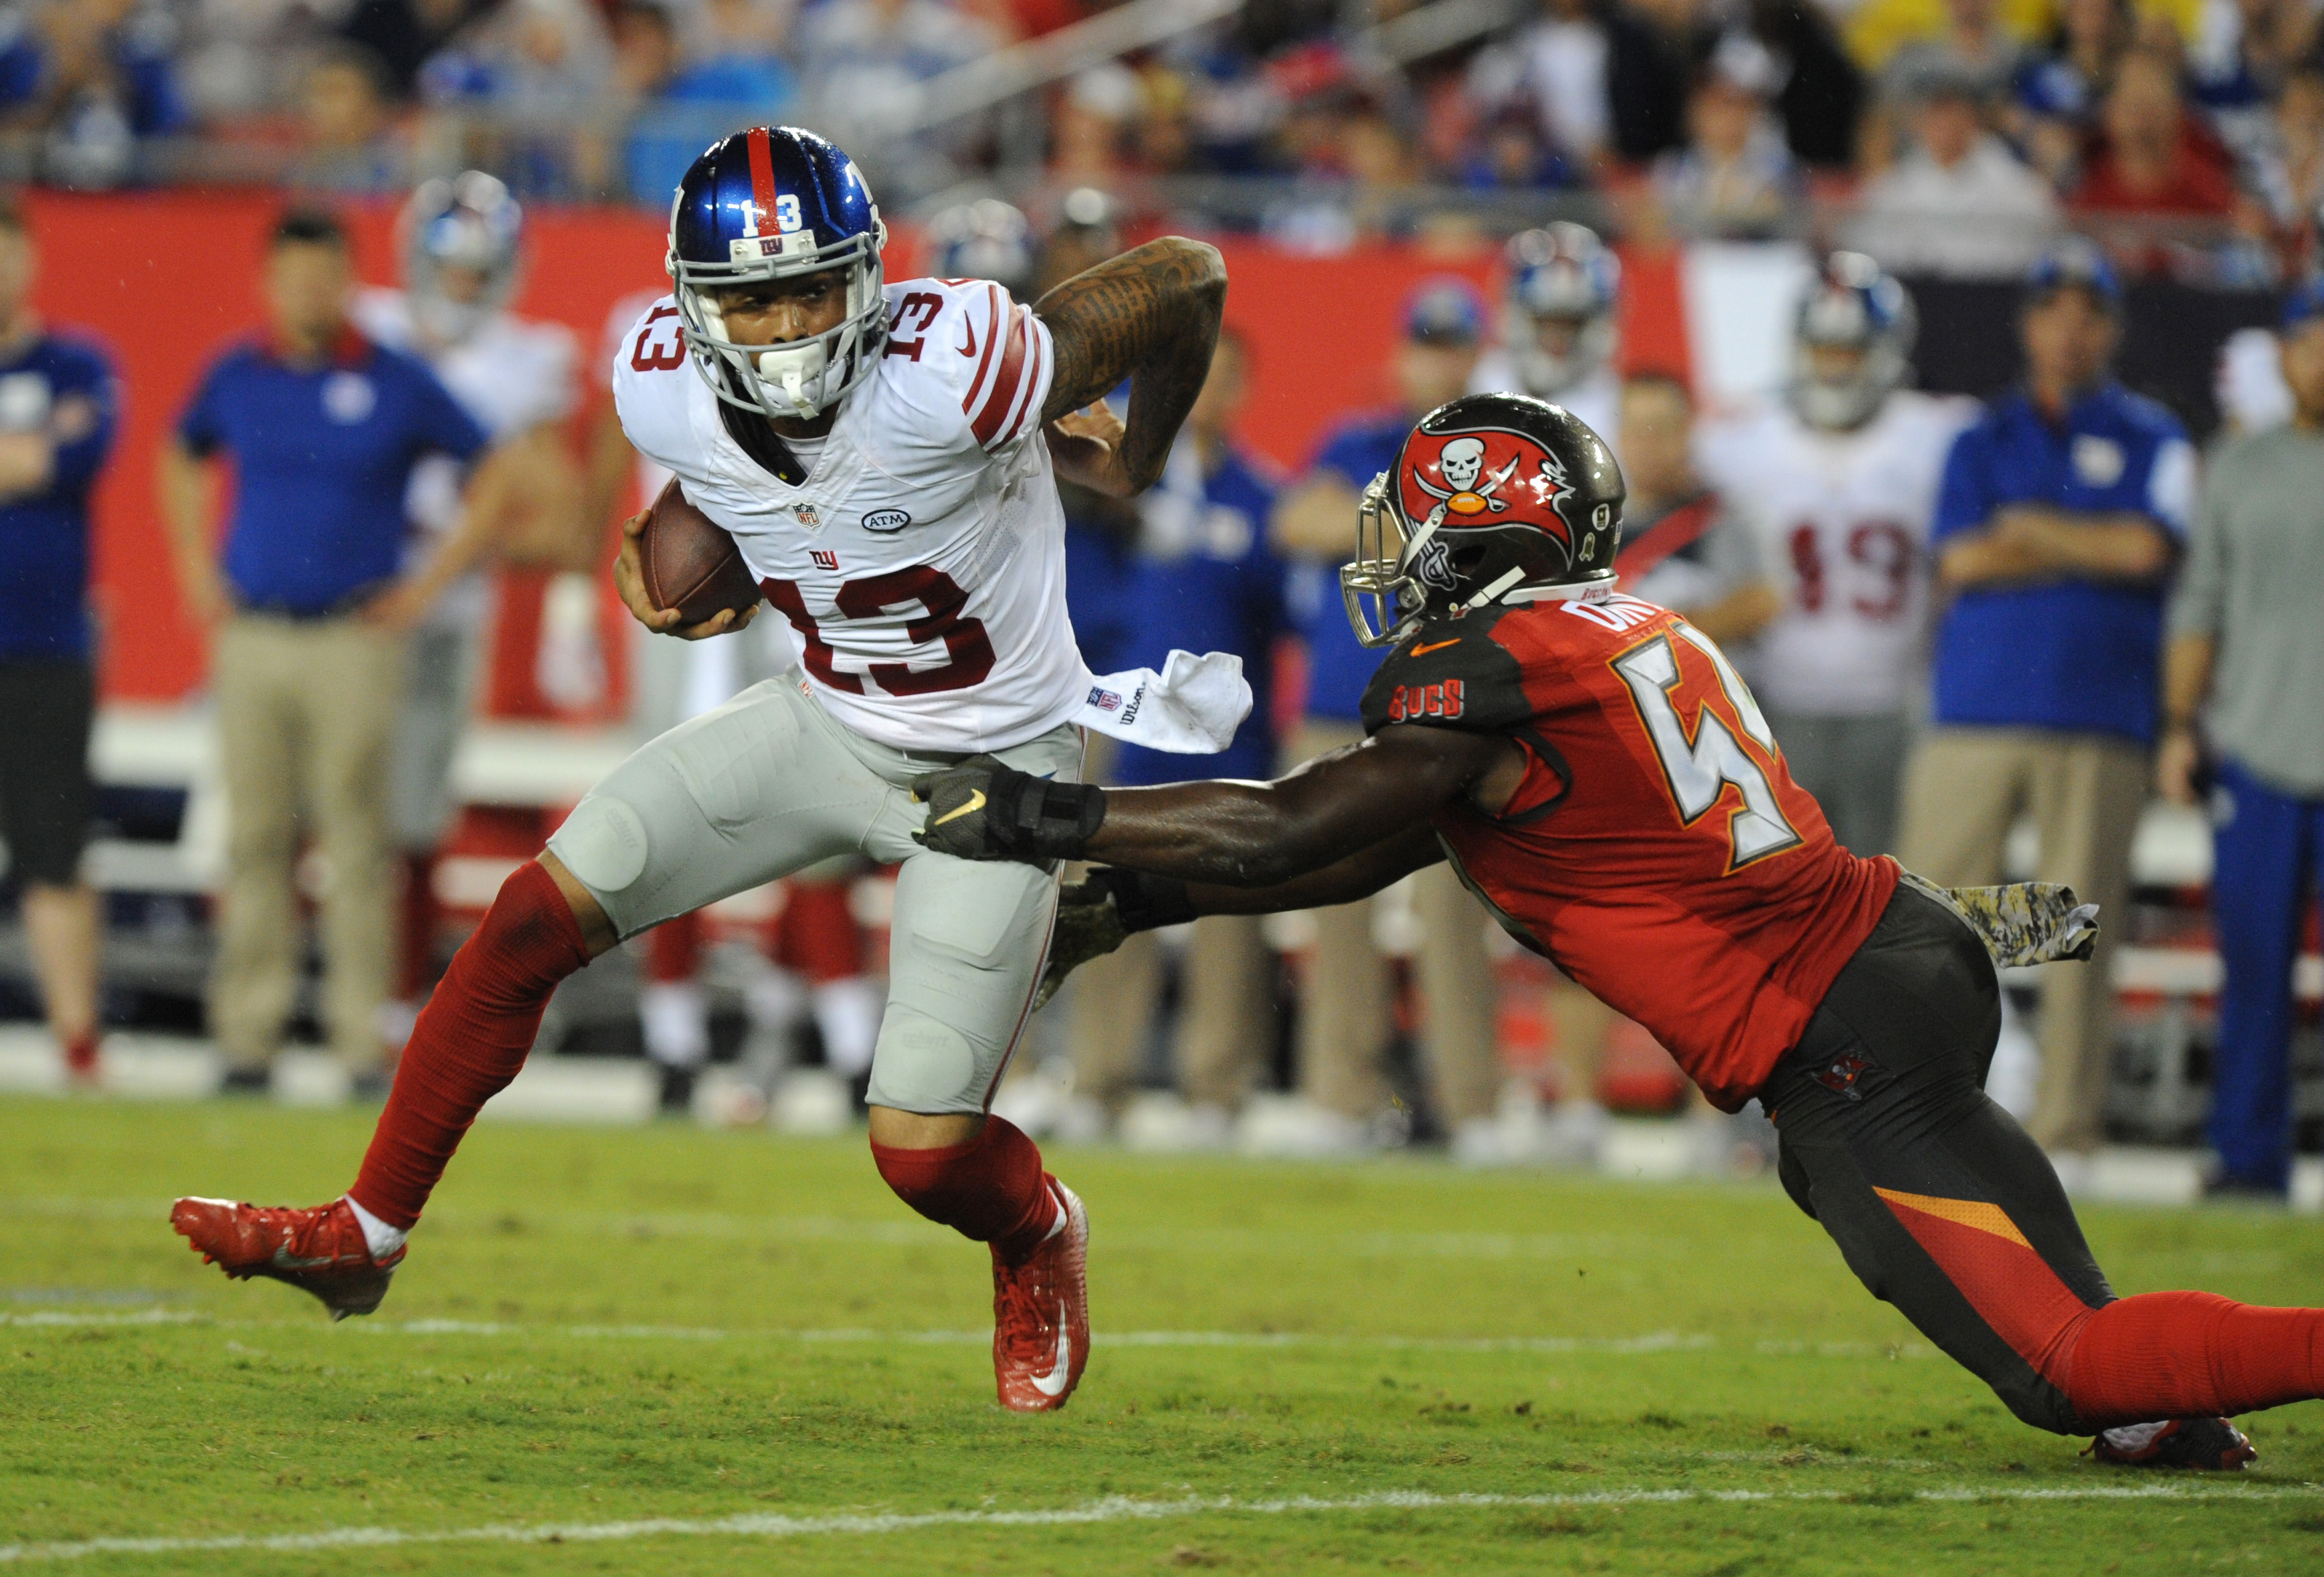 New York Giants at Tampa Bay Buccaneers: Where to Watch, Listen, More